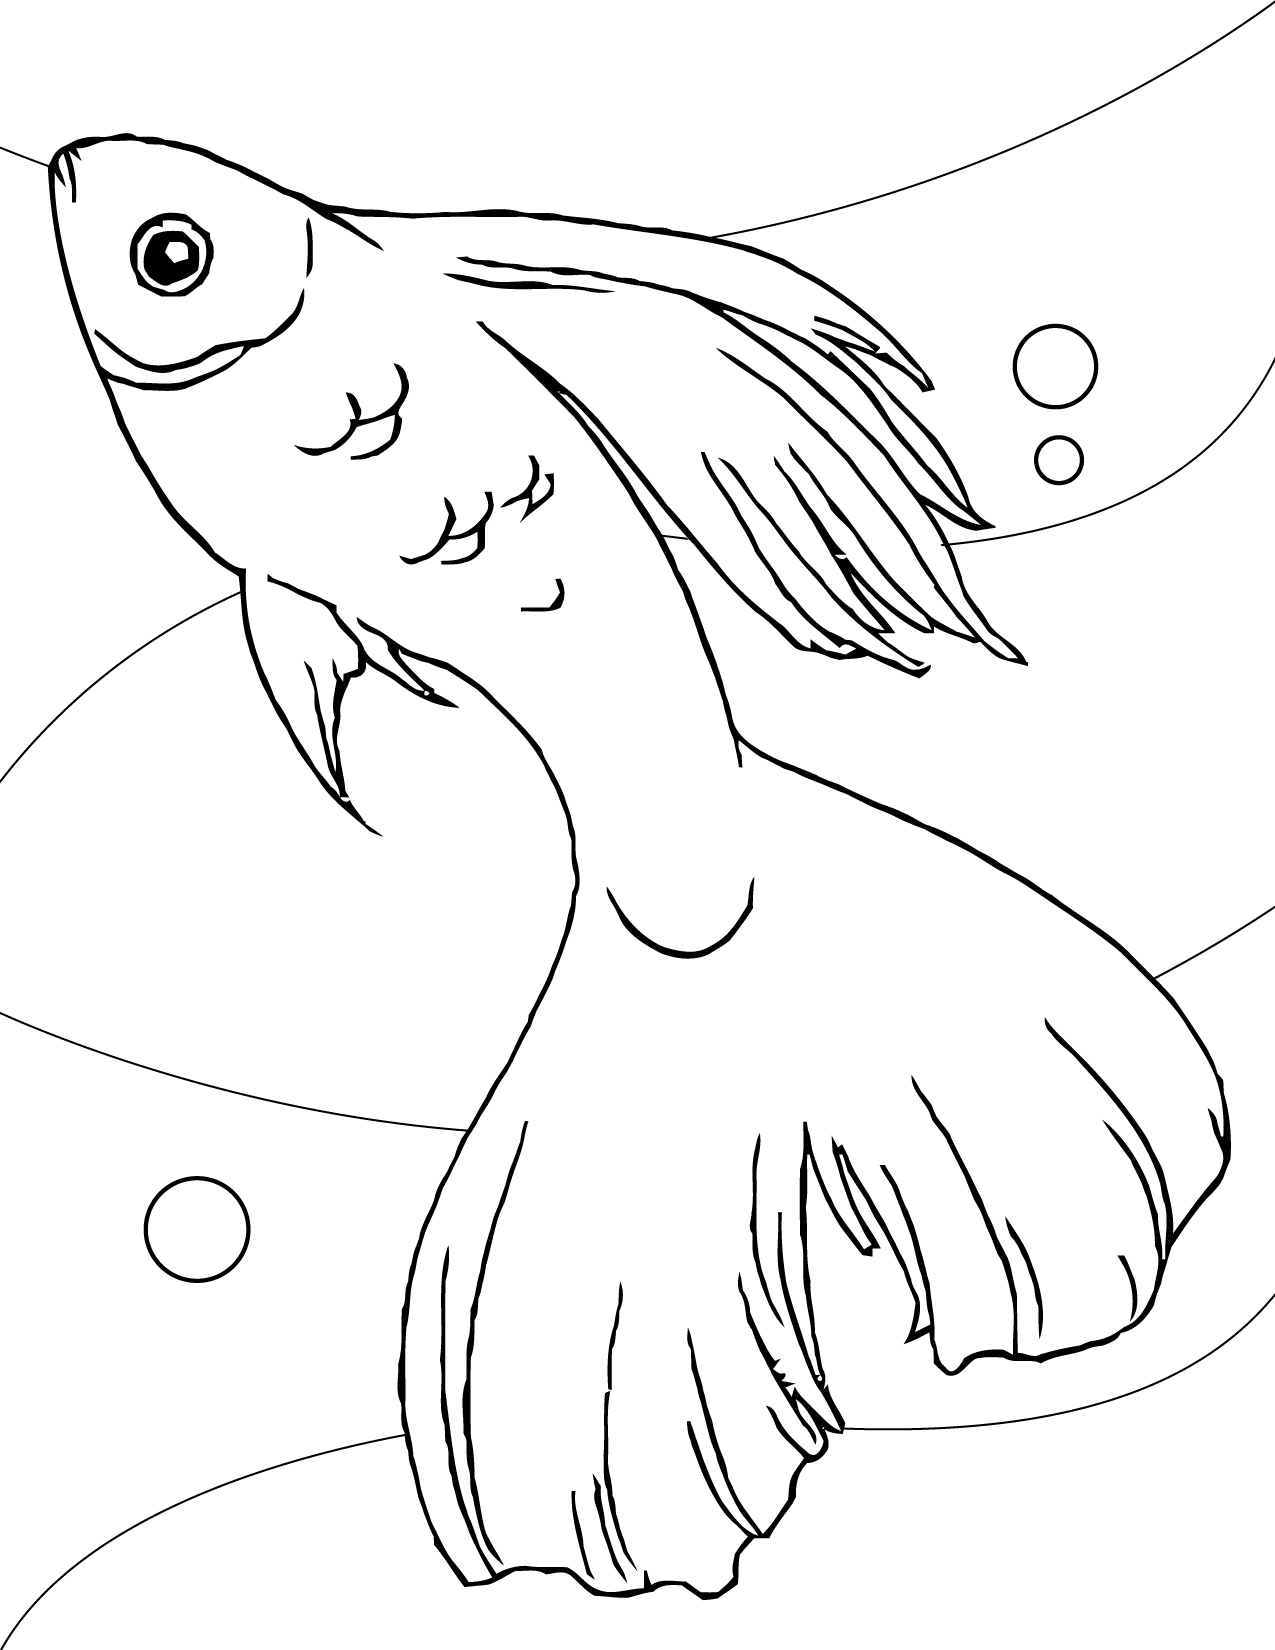  Fish Coloring Pages | print coloring pages | Kids printable coloring pages | #17